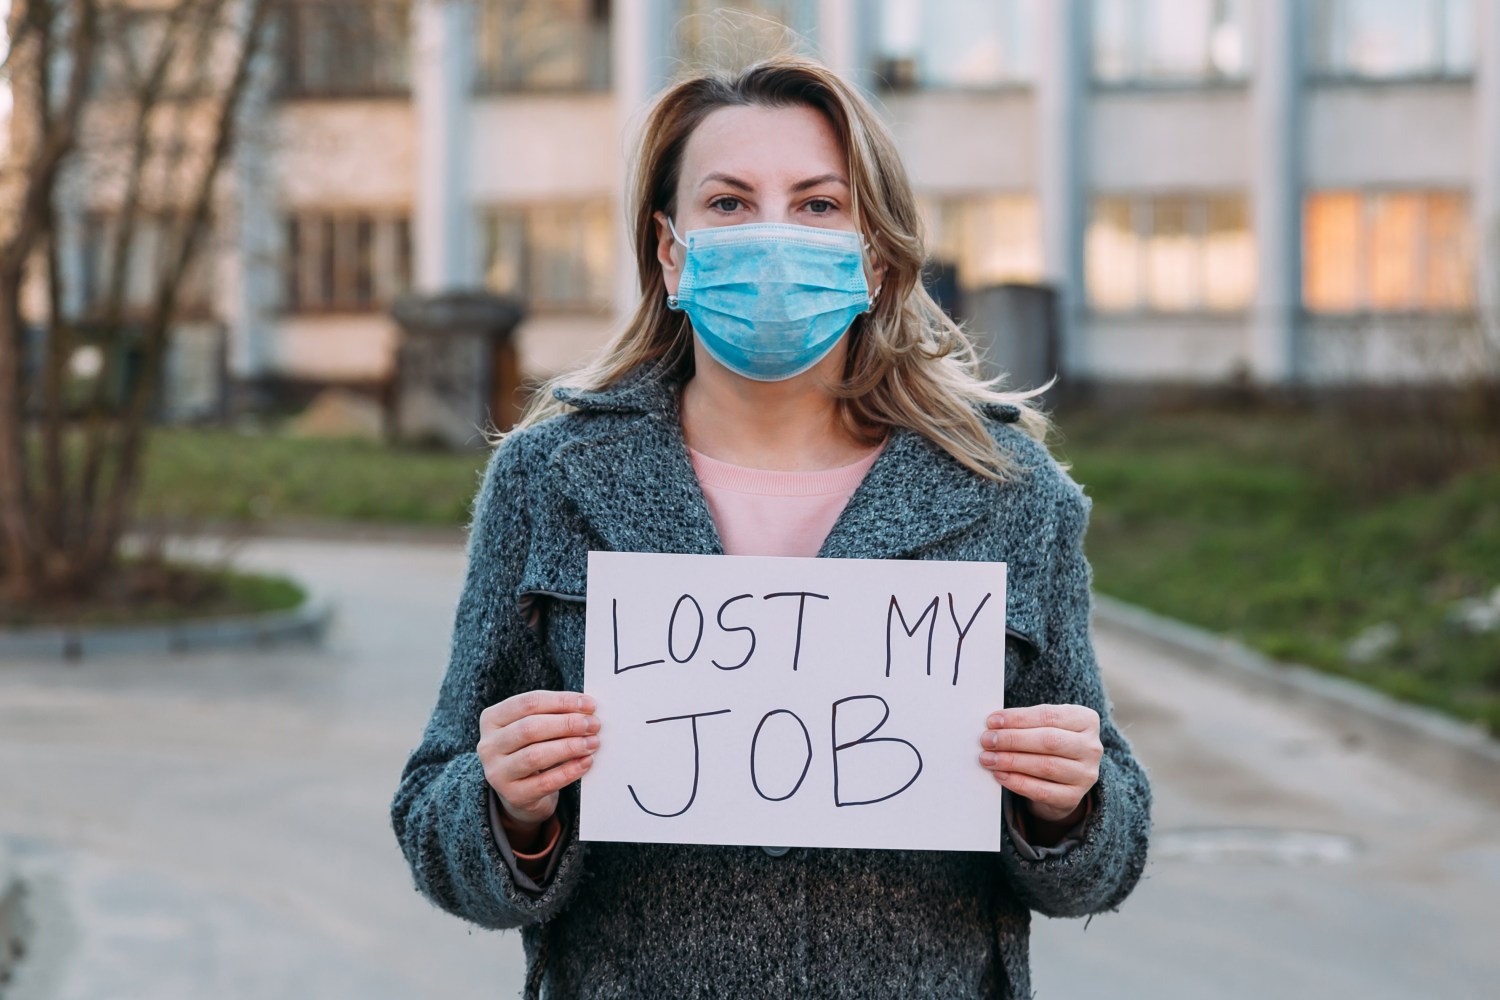 stock image of women holding sign that says, "Lost My Job"